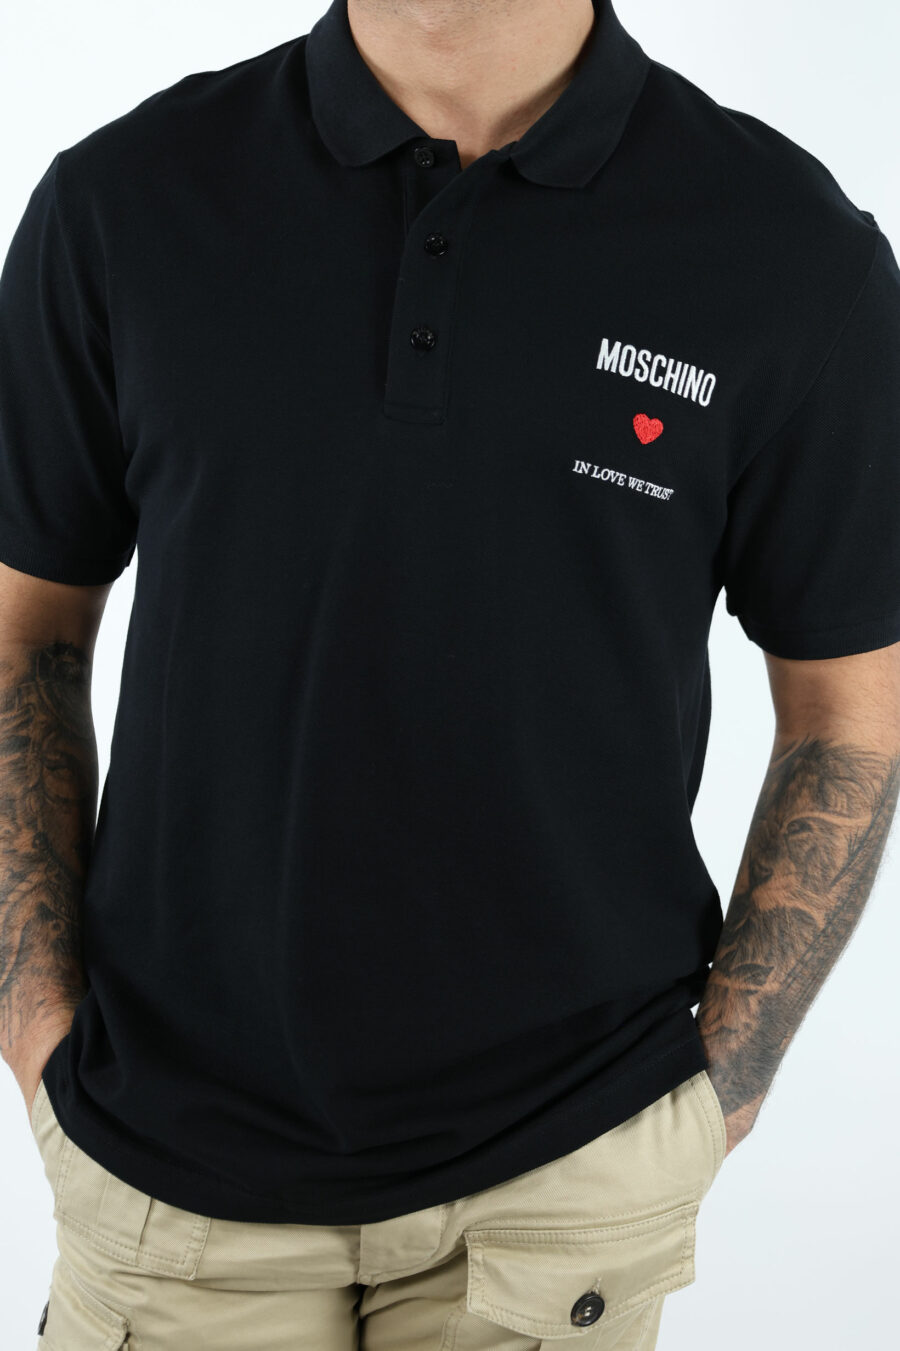 Black polo shirt with logo "in love we trust" - 106971